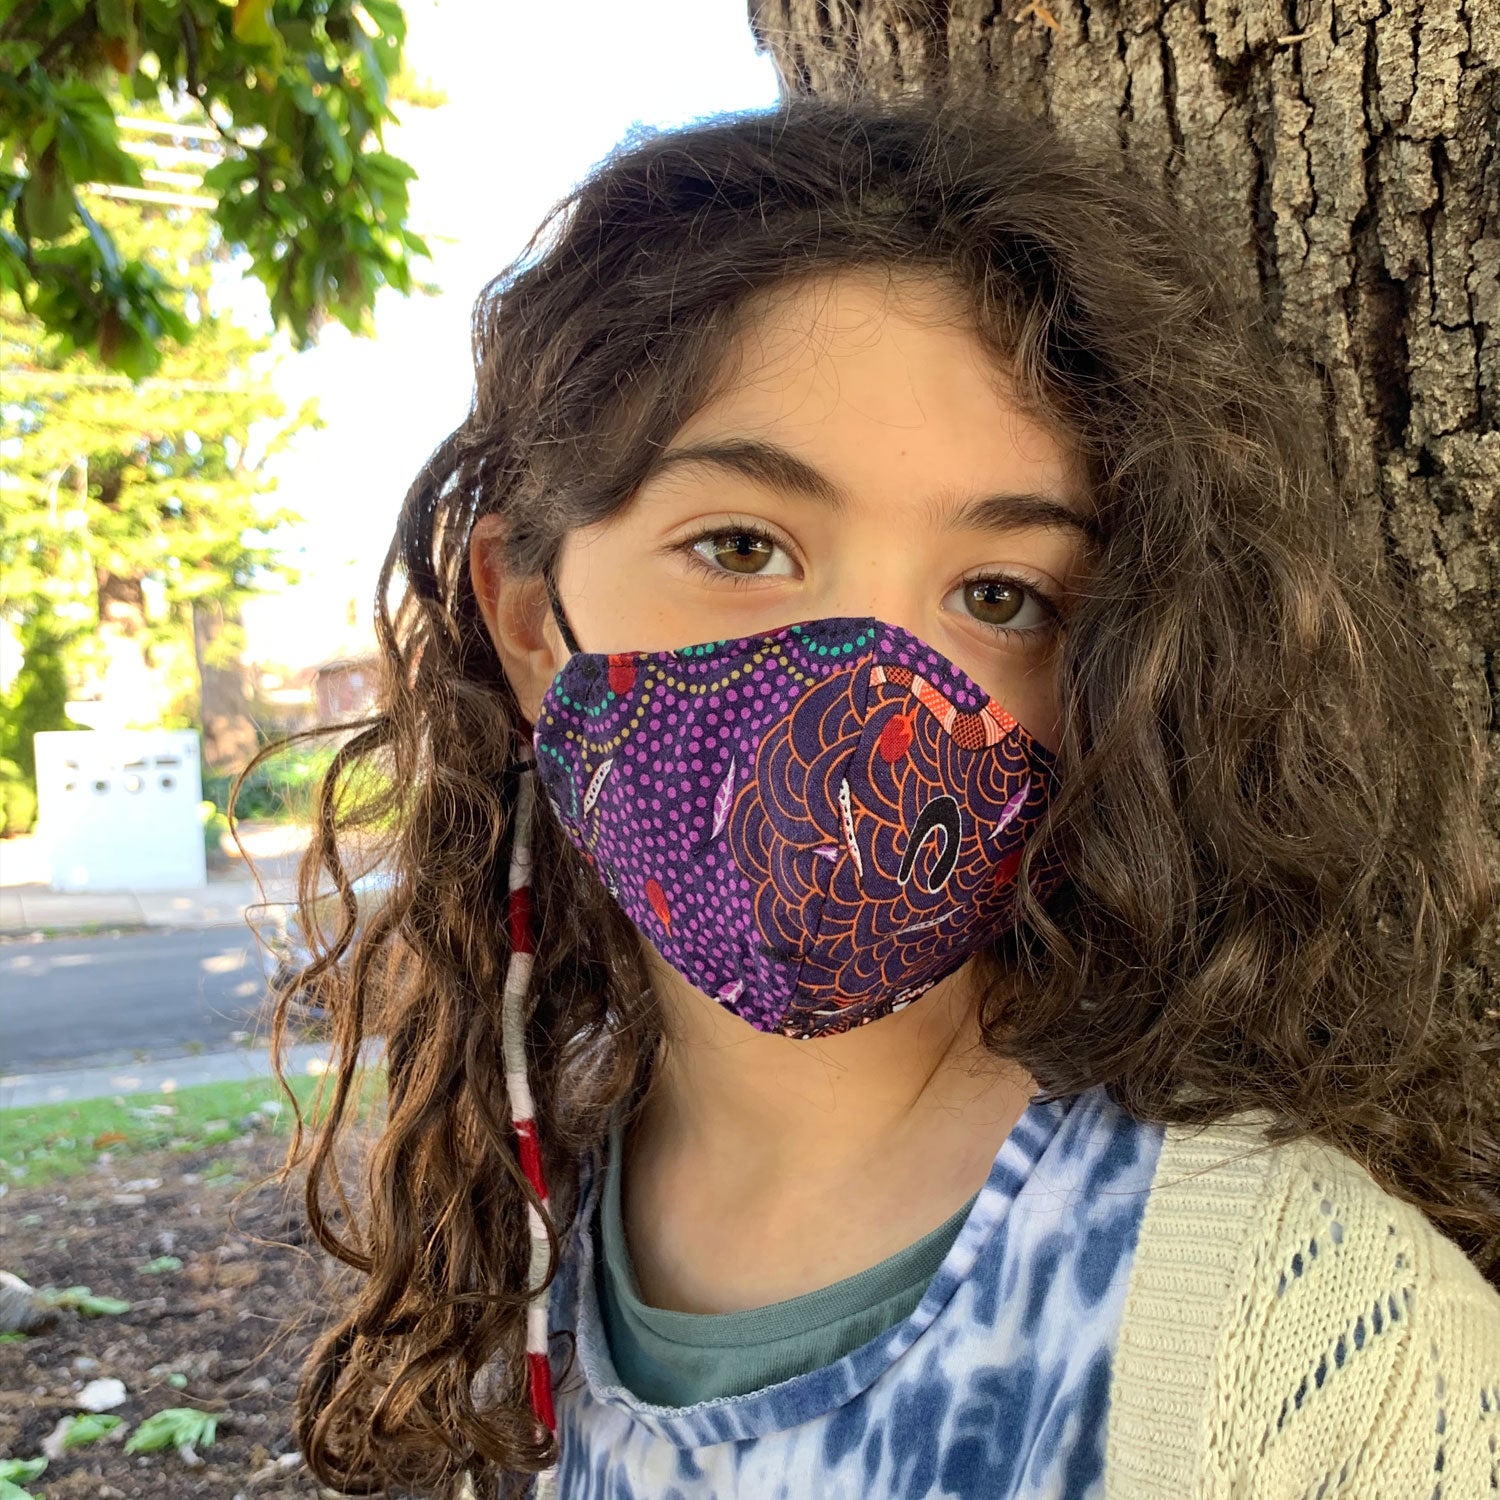 "Outer Space" Print Triple-layer Washable Kids Face Mask 